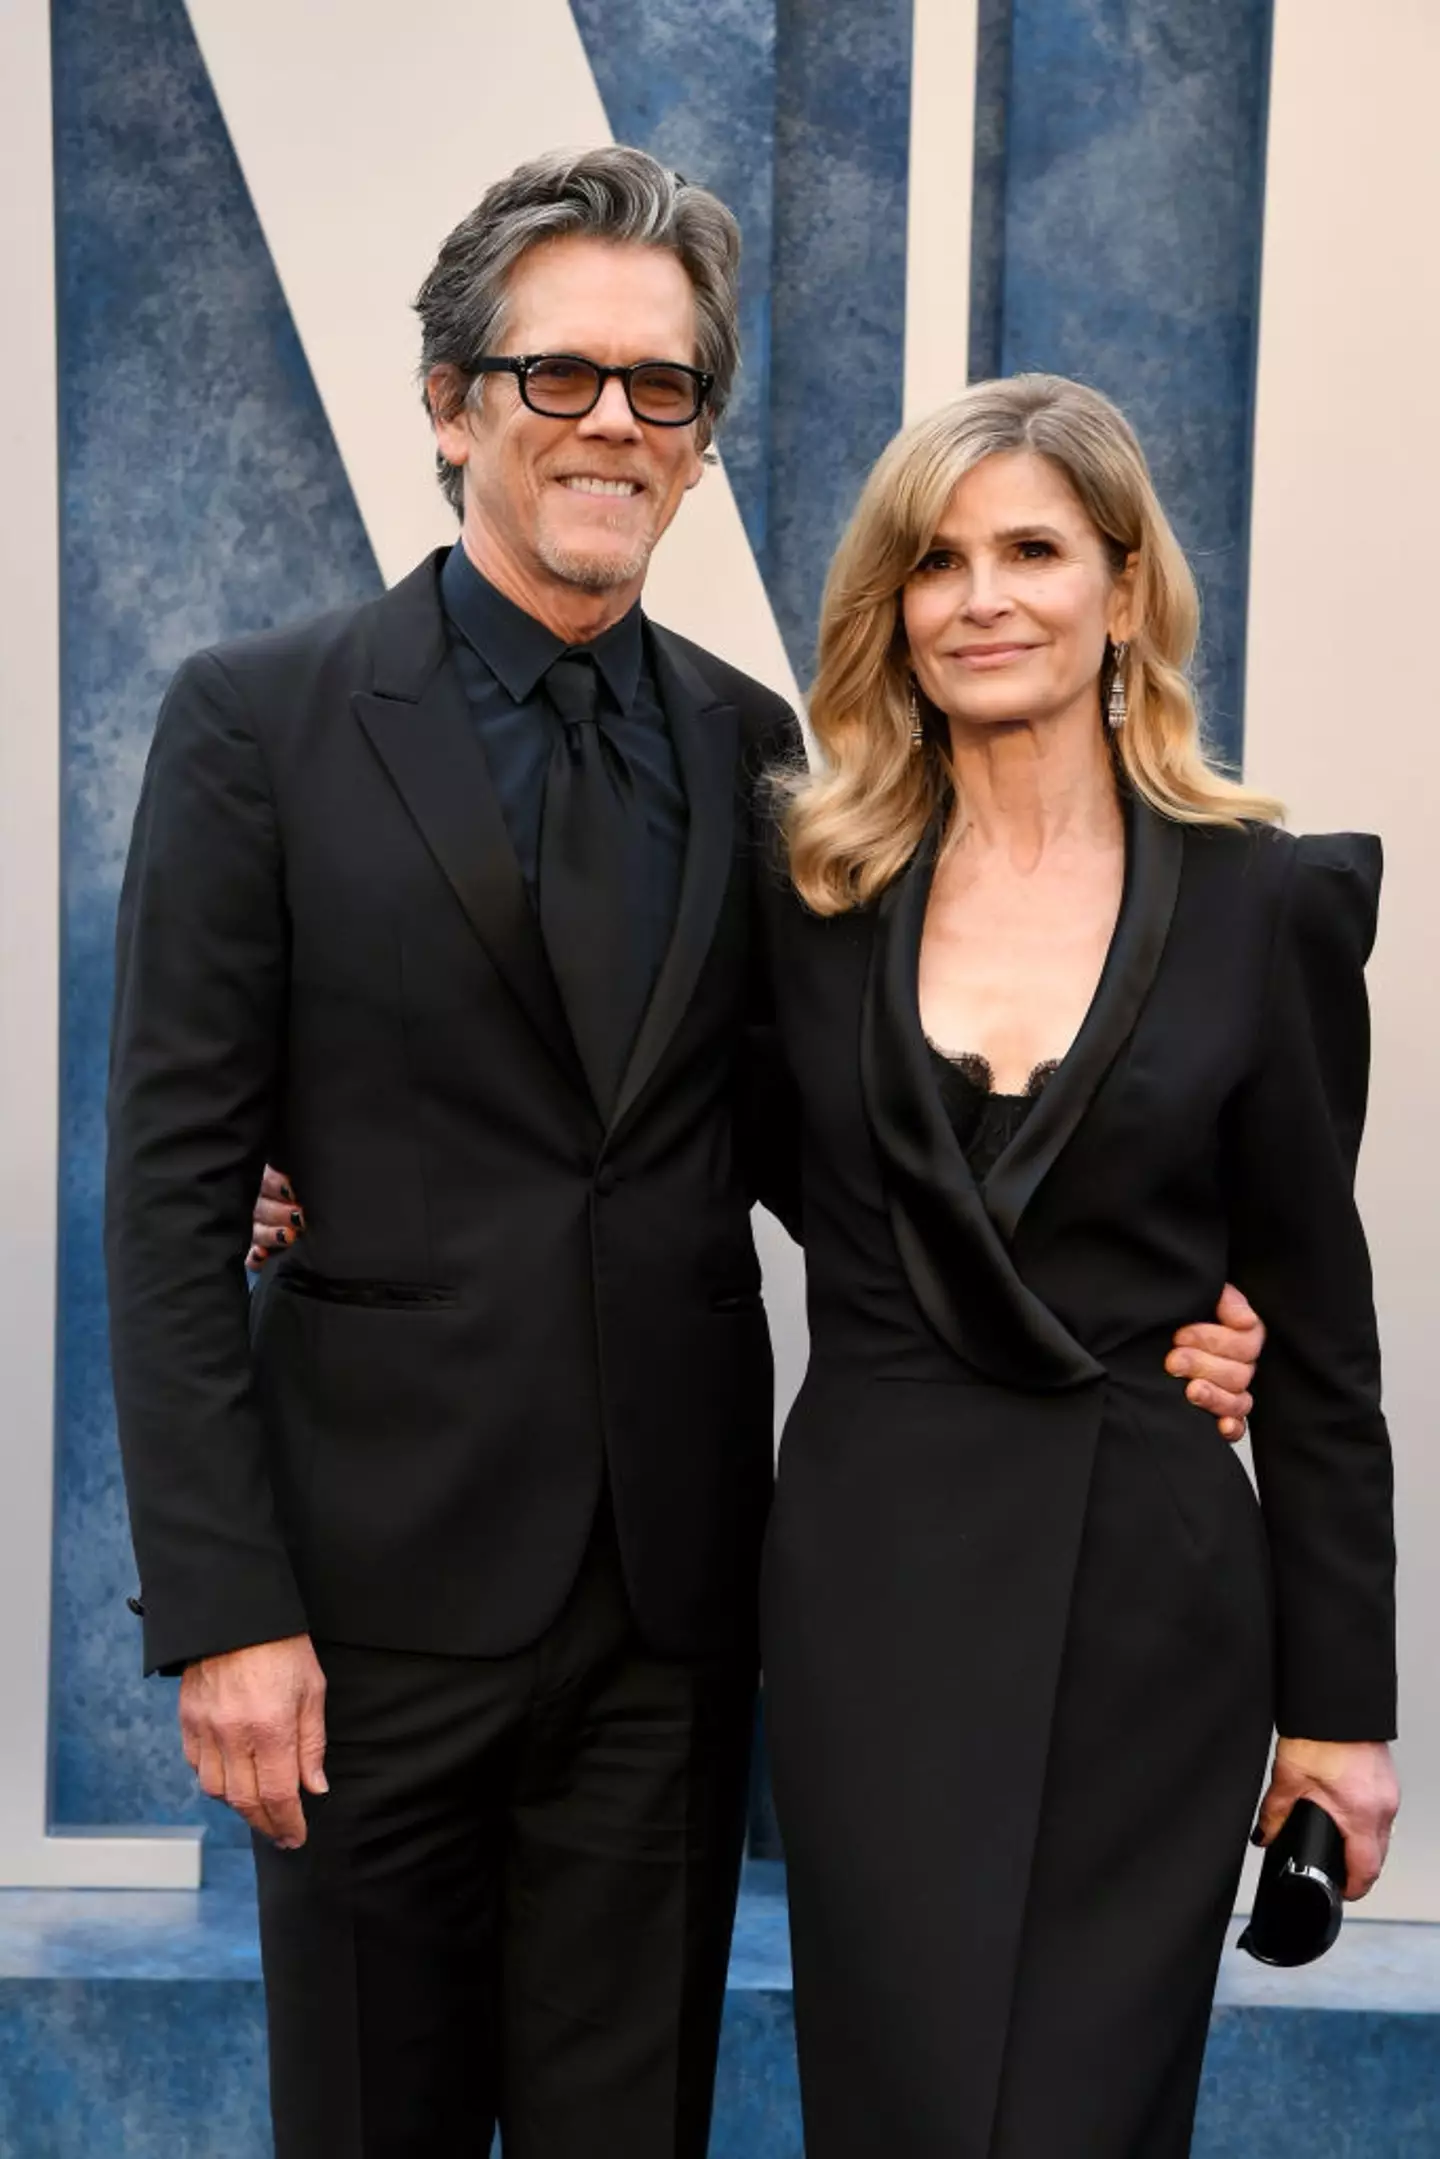 Kevin Bacon and Kyra Sedgwick have been married for more than 30 years.